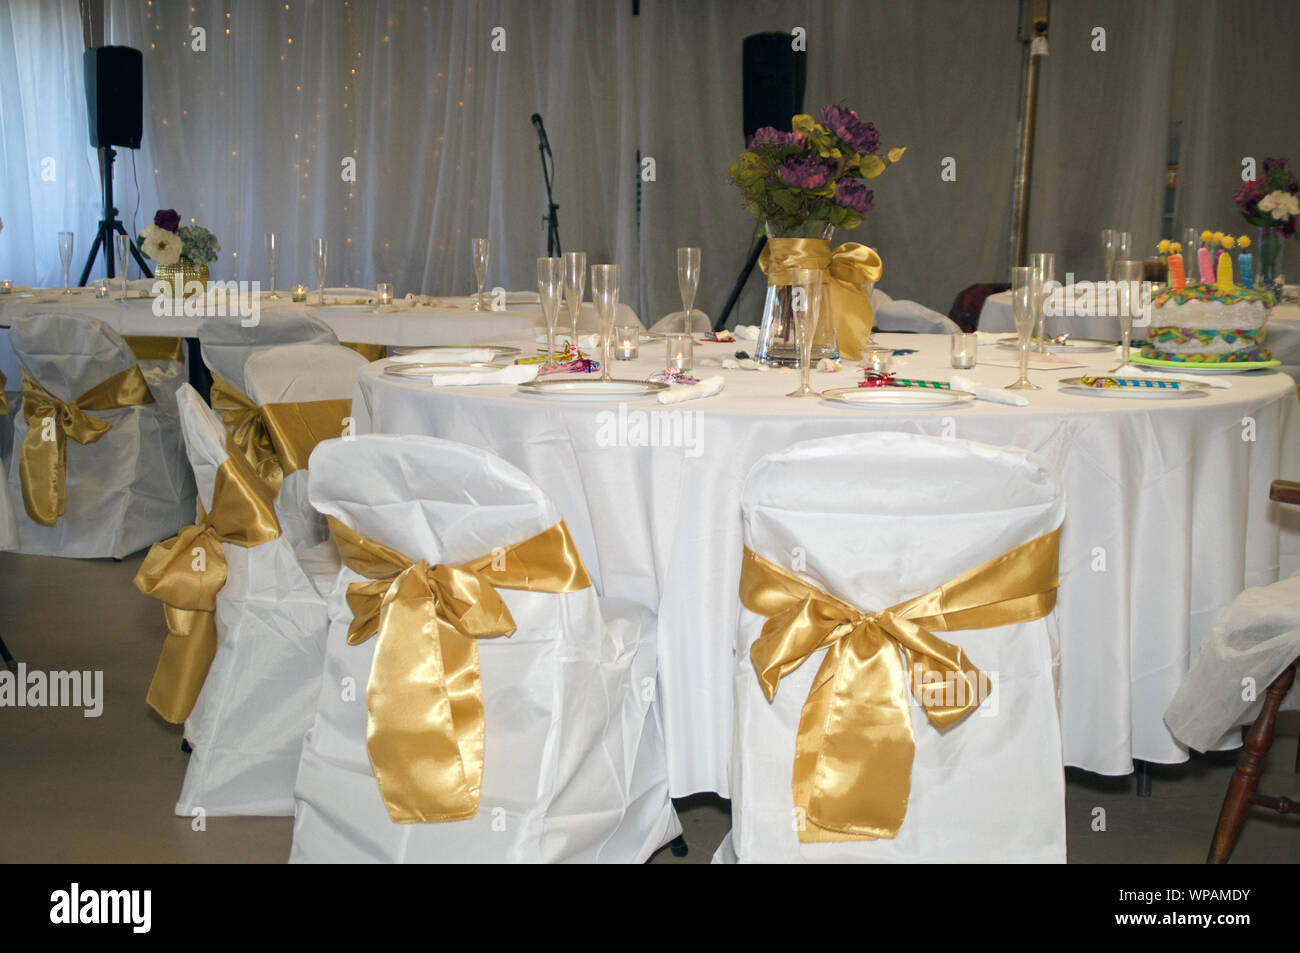 Wedding Reception Party Showing Covered Chairs With Gold Bows